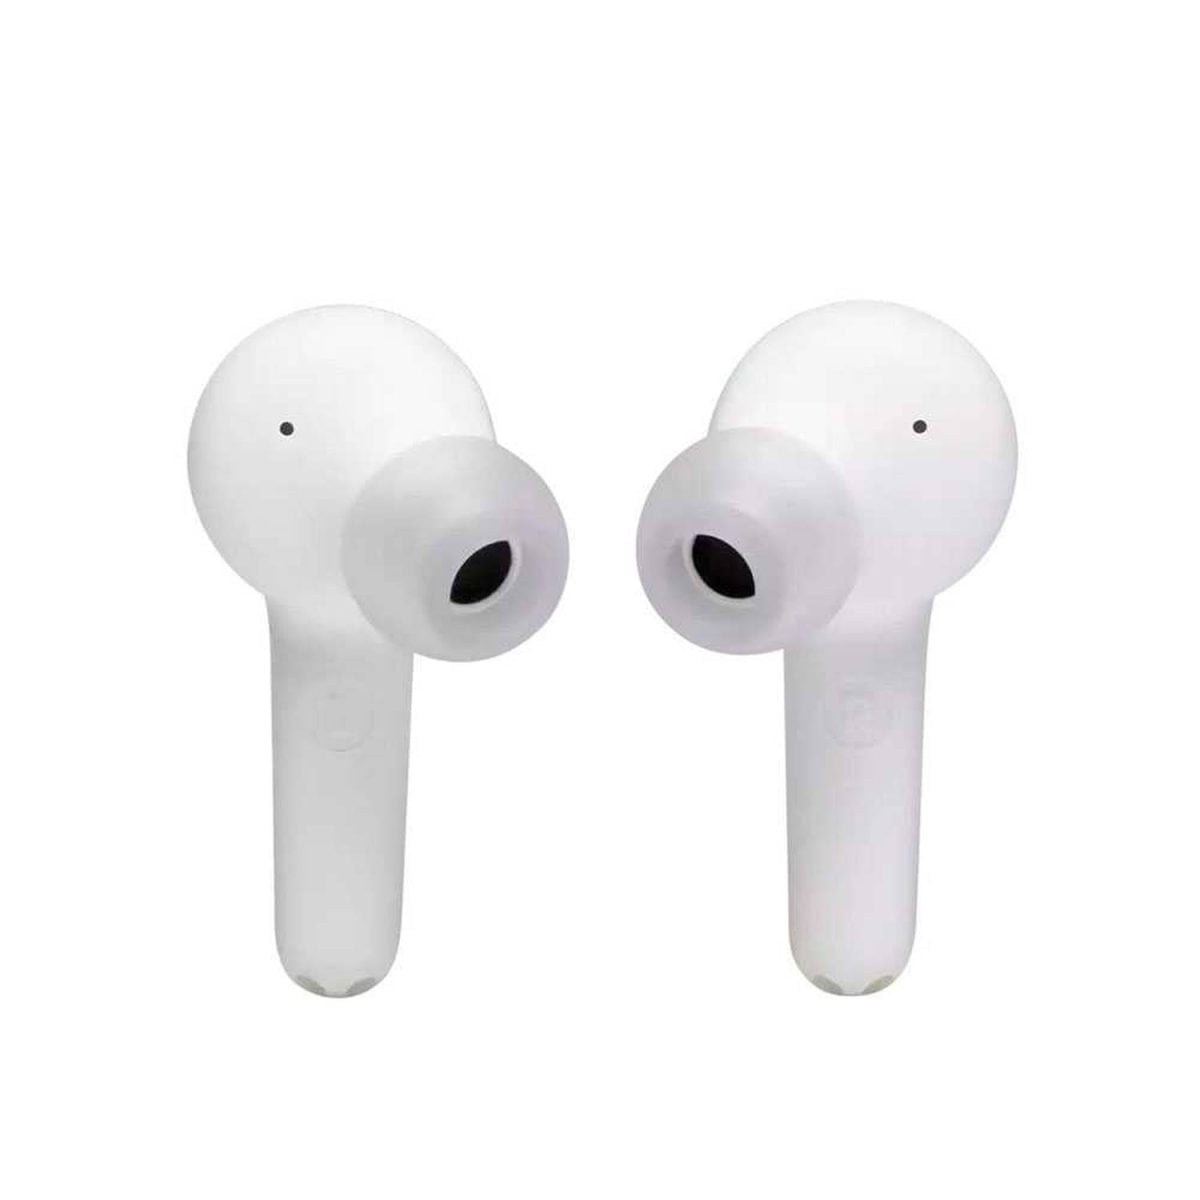 2102171212564 Smart Crop C0 5 0 5 1500X1500 70 Jbl &Lt;H1 Class=&Quot;Product_Title Entry-Title&Quot;&Gt;Jbl Tune 215 Tws Earbuds - White&Lt;/H1&Gt; &Lt;Ul&Gt; &Lt;Li&Gt;Dual Connect Gives You The Freedom To Listen To Music Or Attend To Calls With Either One Or Both Earbuds&Lt;/Li&Gt; &Lt;Li&Gt;Offers Up To 5 Hours Of Battery Life And Up To 20 Hours More When Using The Charging Case&Lt;/Li&Gt; &Lt;Li&Gt;Quickly Recharge Via The Usb-C Interface&Lt;/Li&Gt; &Lt;Li&Gt;Charging Case Features A River Stone-Inspired Design, With A Soft Body And A Curved Lid That Pops Out To Give You Quick Access To The Buds&Lt;/Li&Gt; &Lt;/Ul&Gt; Jbl Earphones Jbl Tune 215 Tws Earbuds - White